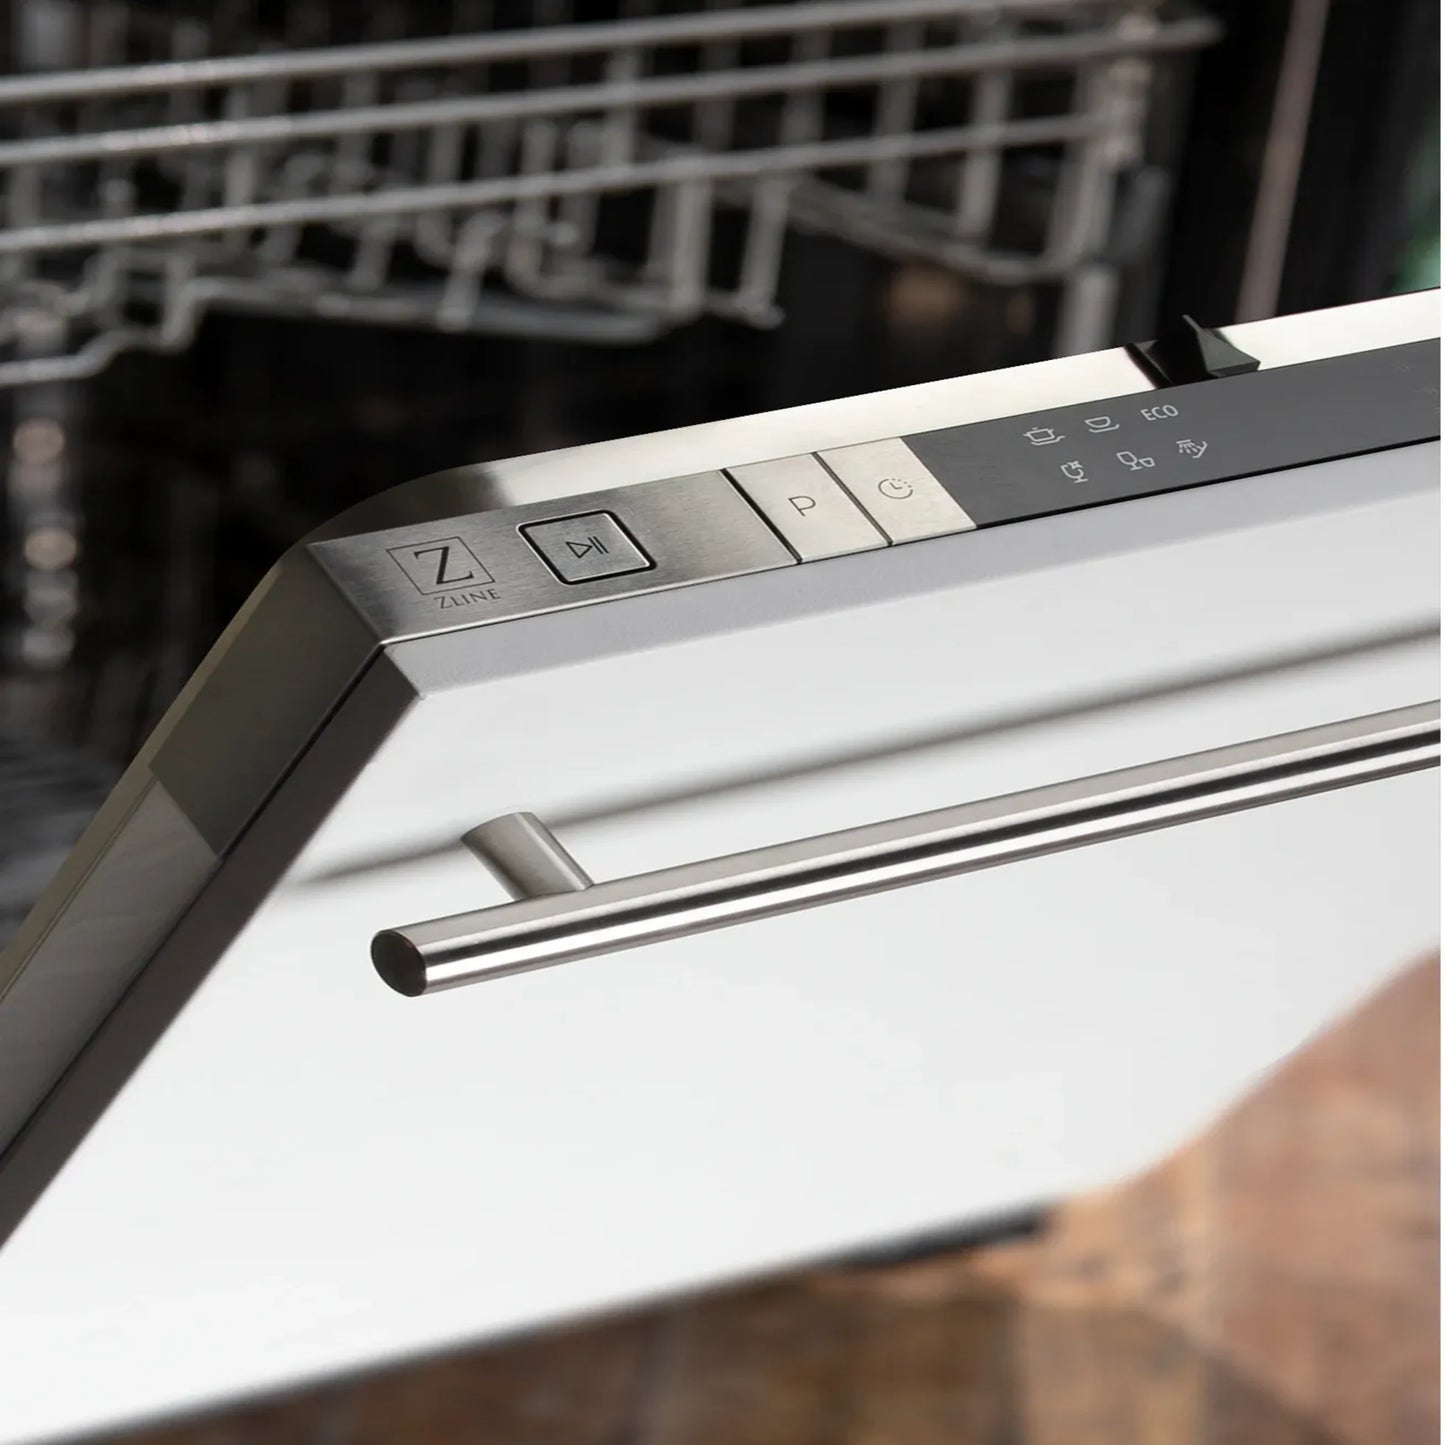 ZLINE 18 in. Top Dishwasher with White Matte Panel and Modern Handle (DW-WM-H-18)